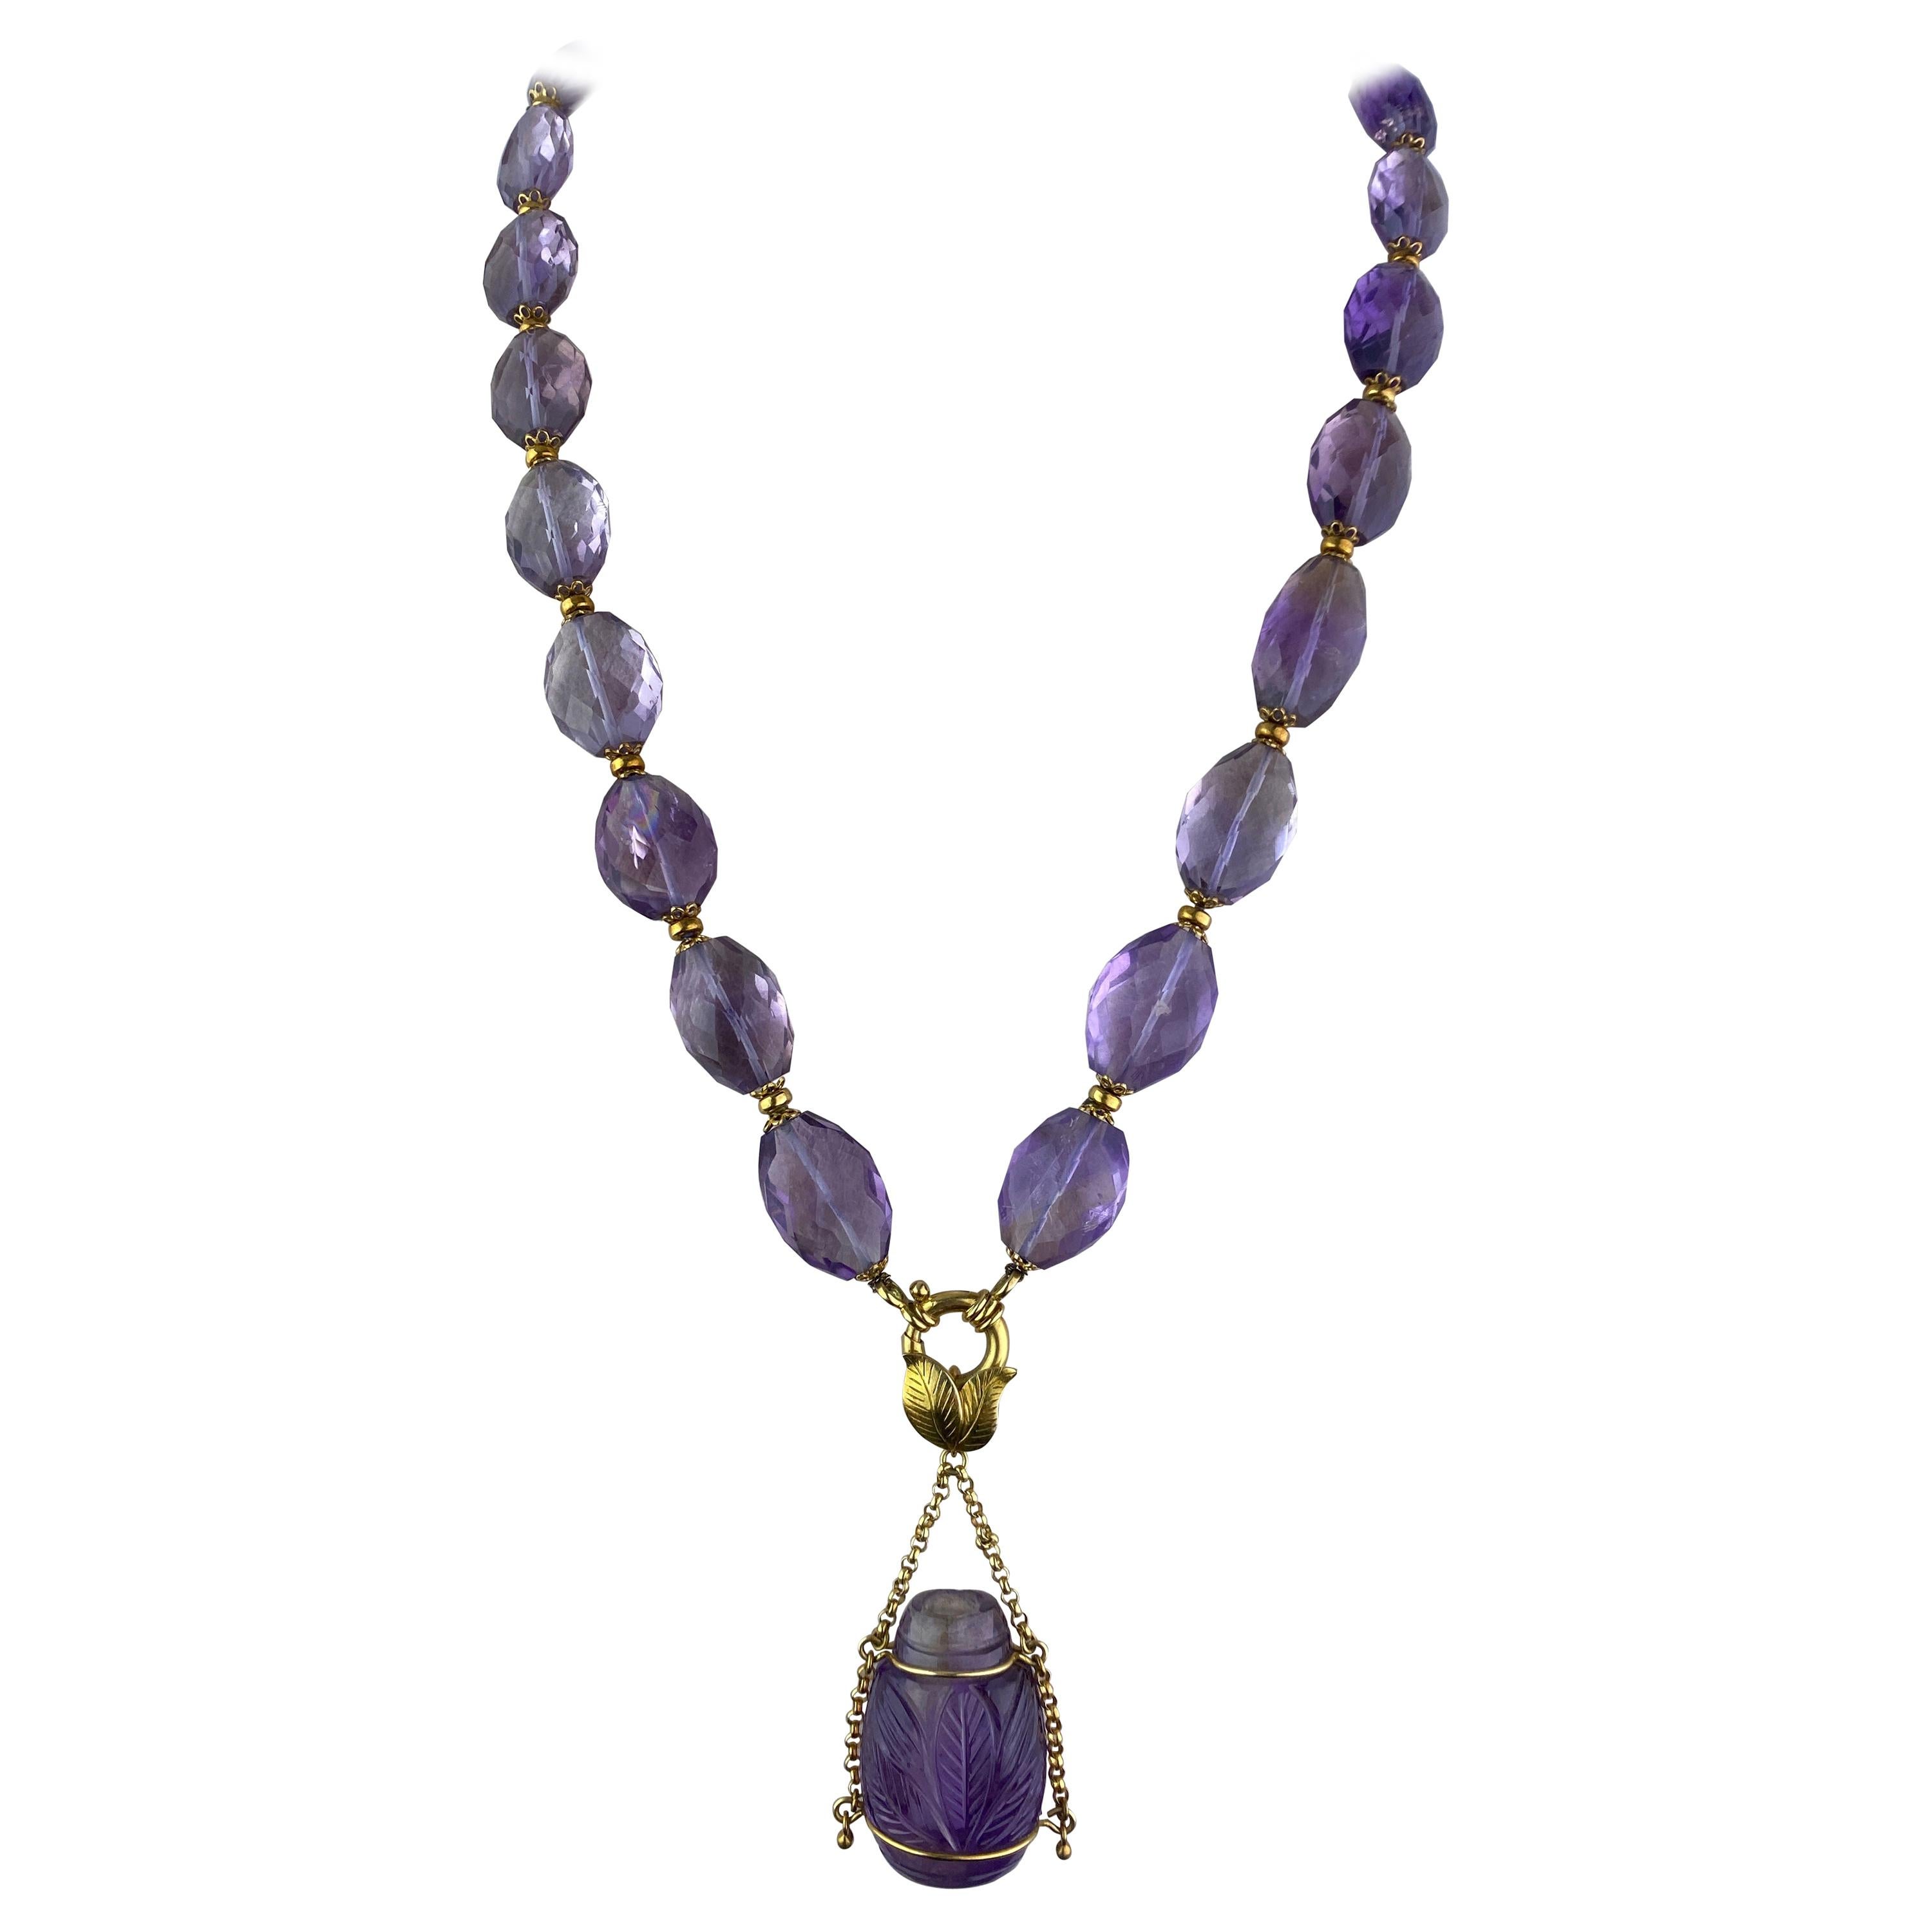 650 Carat Amethyst and Gold Beaded Necklace For Sale